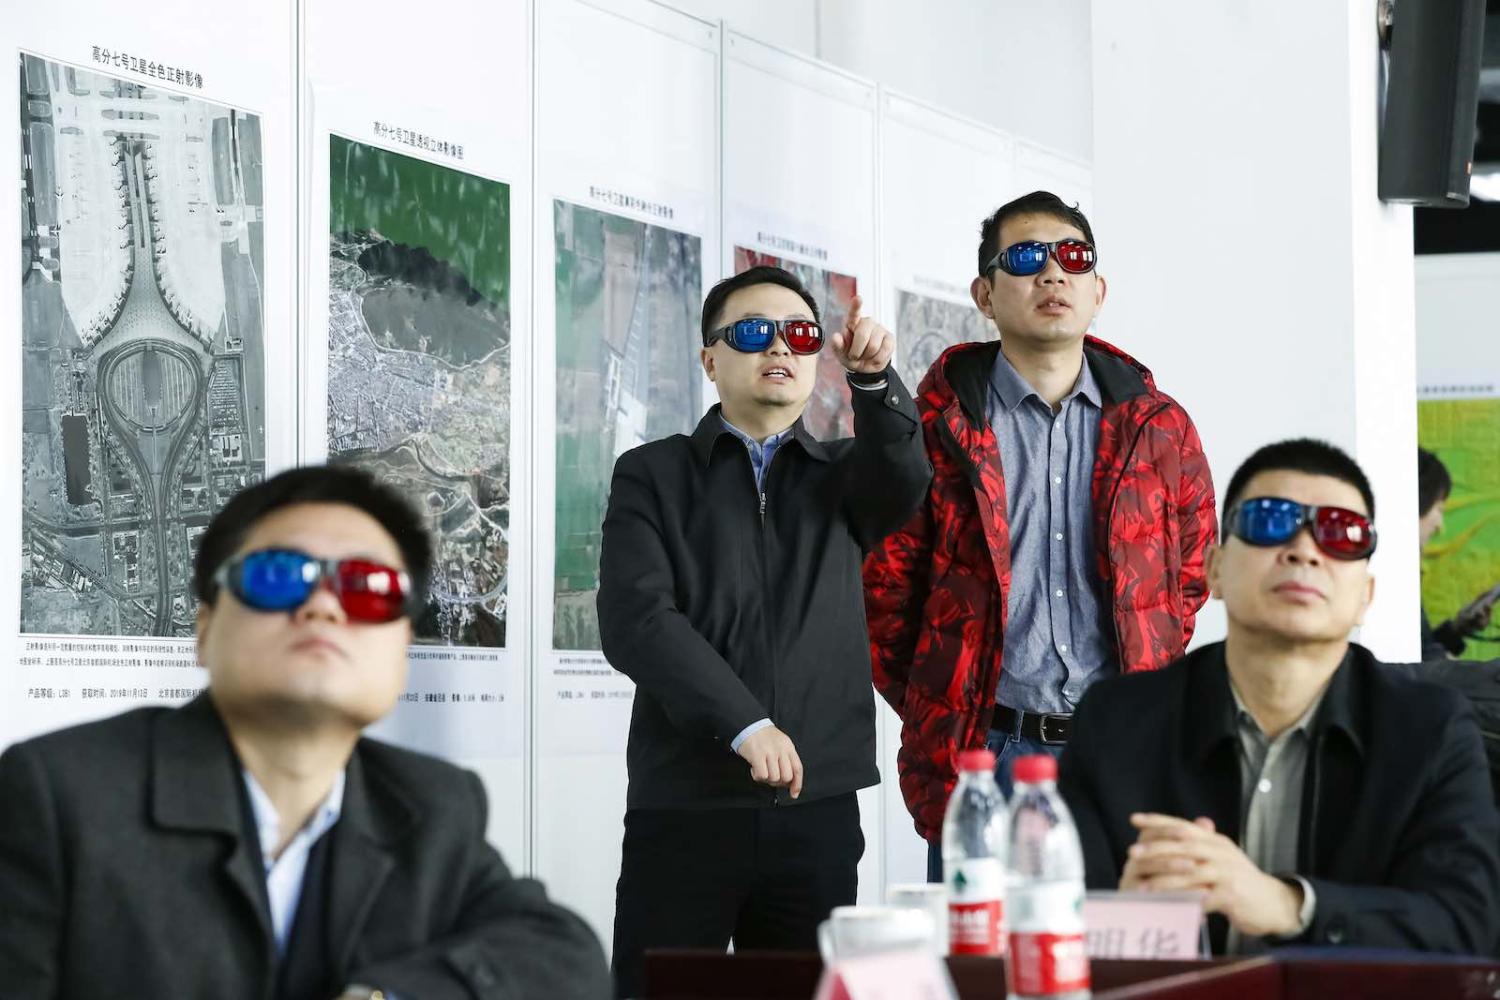 Watching 3-D images during the launching ceremony of the Gaofen-7 Earth observation satellite in Beijing, 10 December 2019 (Shen Bohan/Xinhua via Getty Images) 